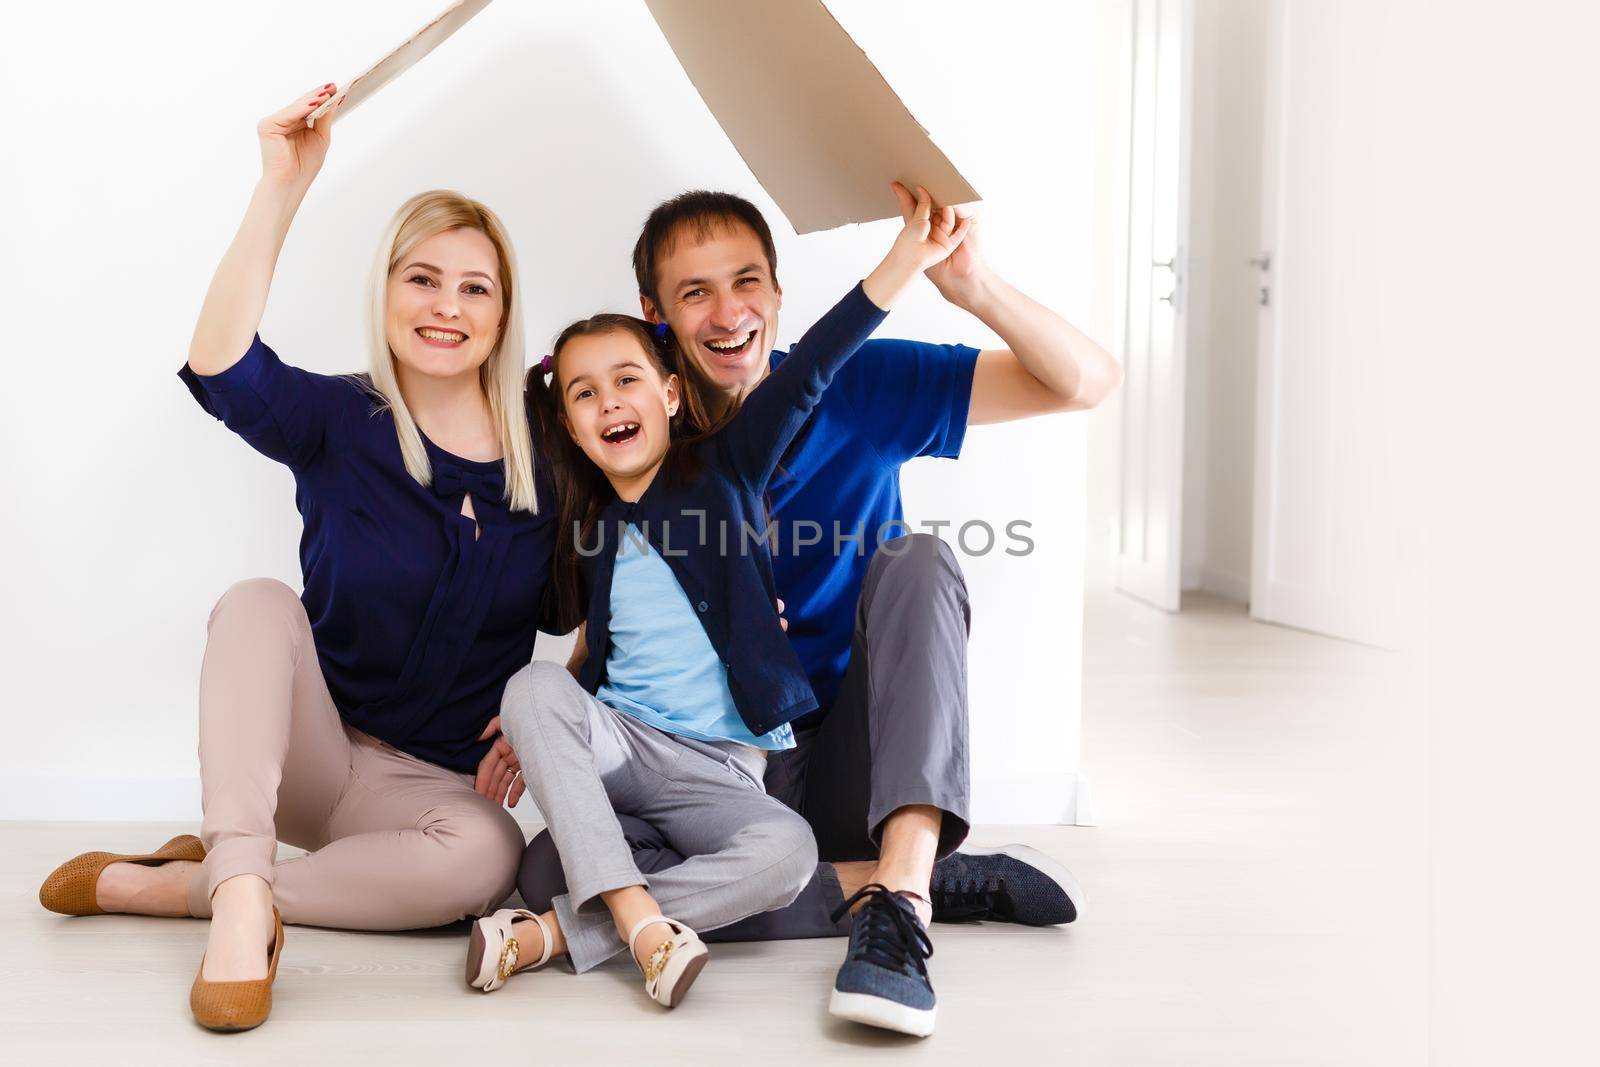 Portrait of happy family of three looking at camera with smiles